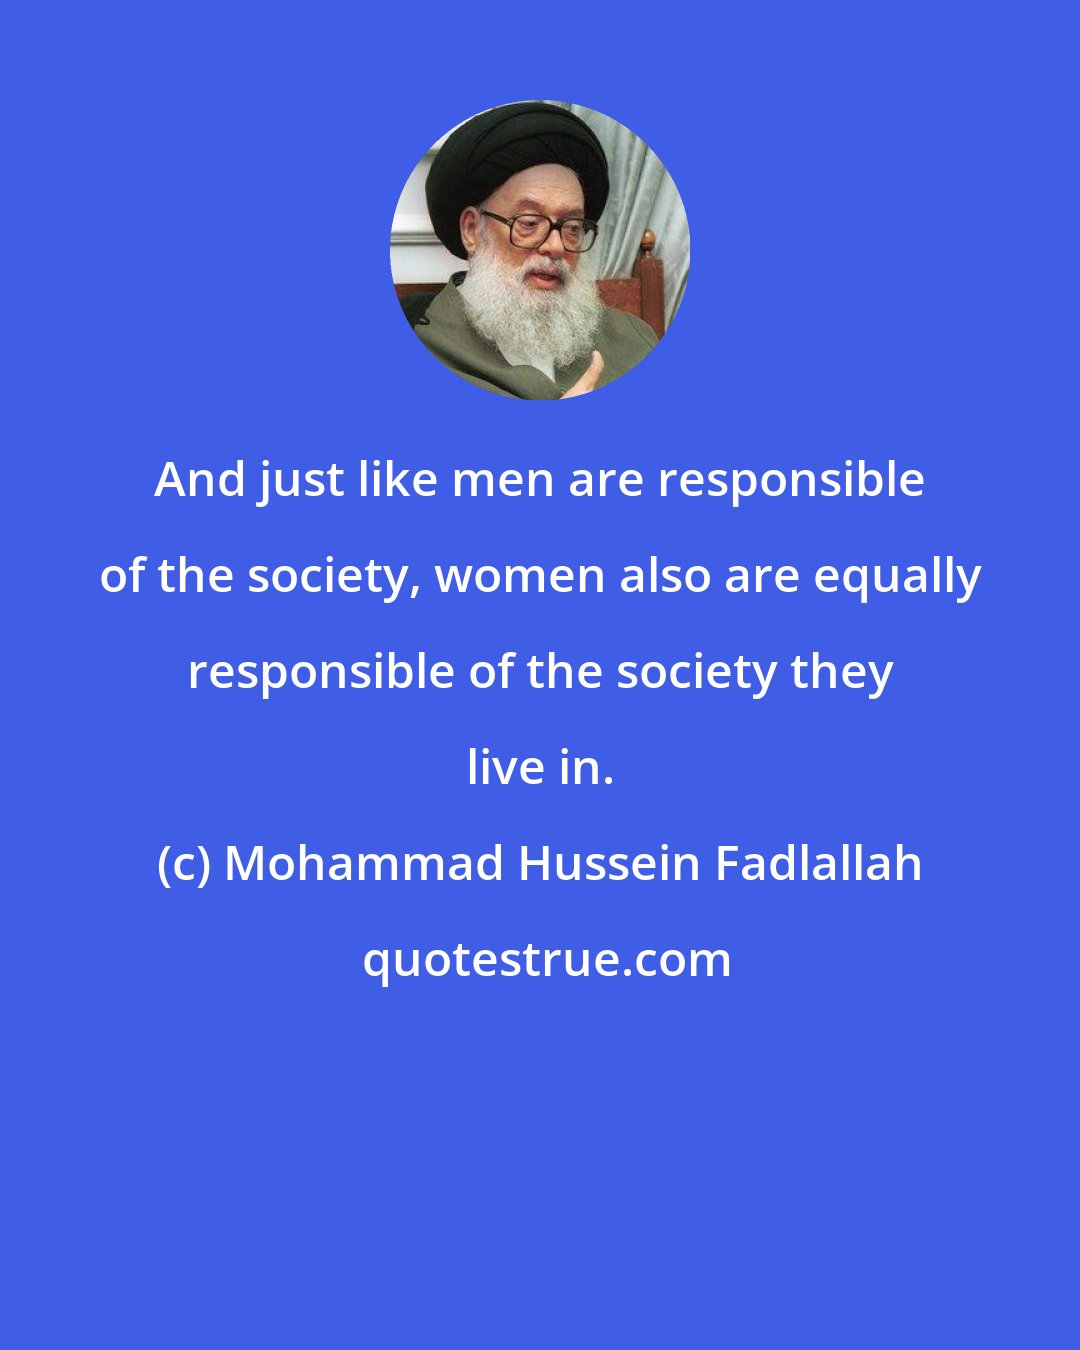 Mohammad Hussein Fadlallah: And just like men are responsible of the society, women also are equally responsible of the society they live in.